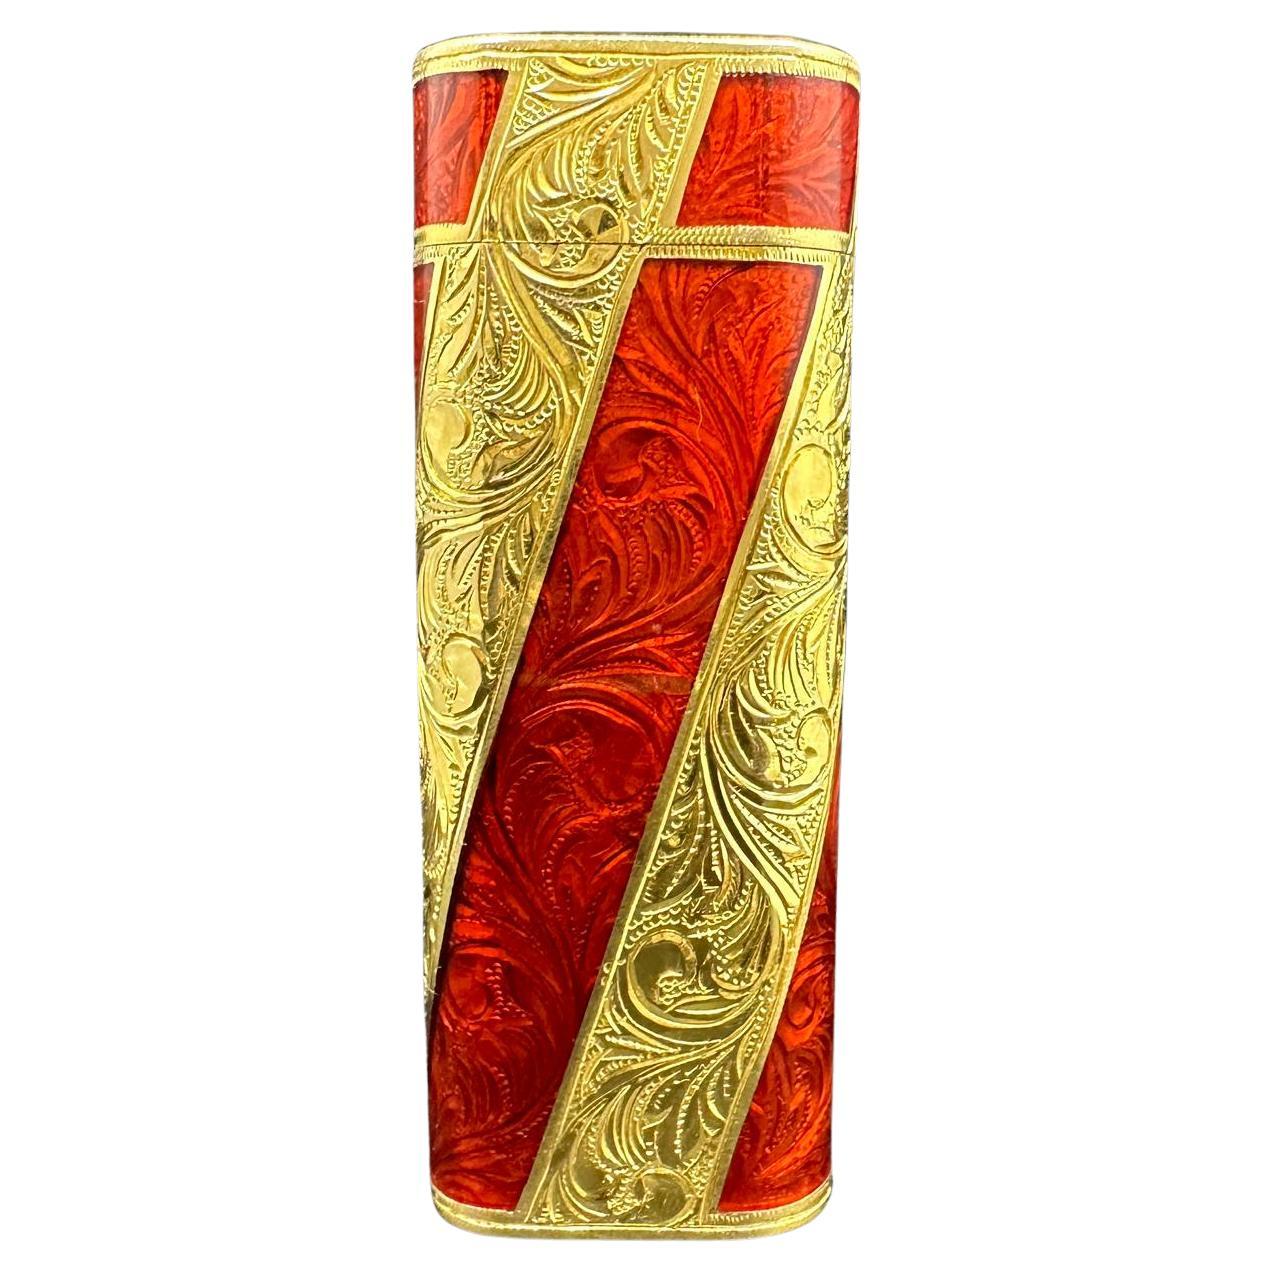 Rare Cartier Roy King Rollagas Gold and Red lacquer lighter 